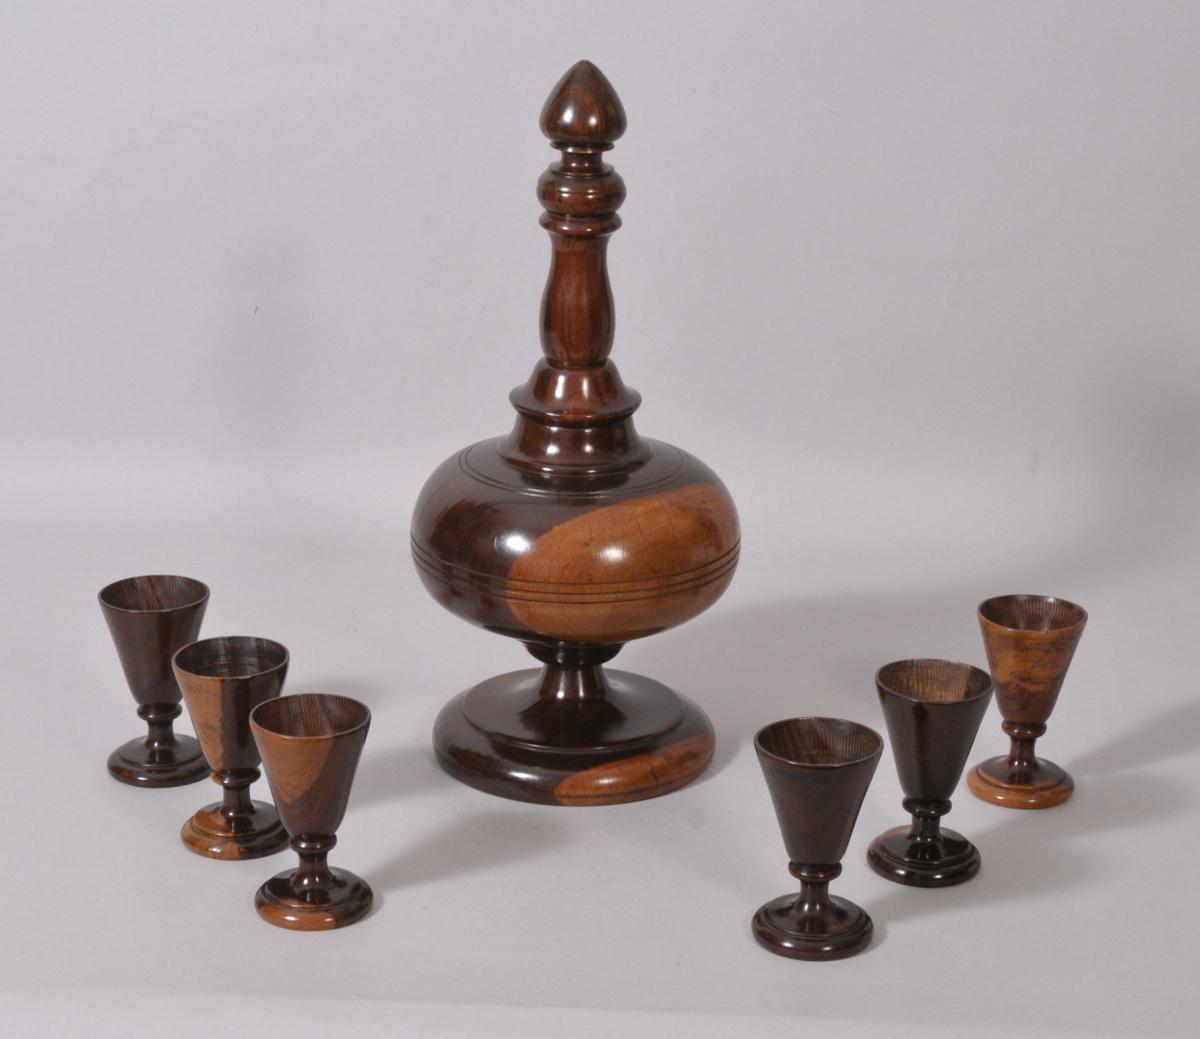 S/2458 Antique Treen 19th Century Lignum Vitae Decanter and Set of Six Goblets